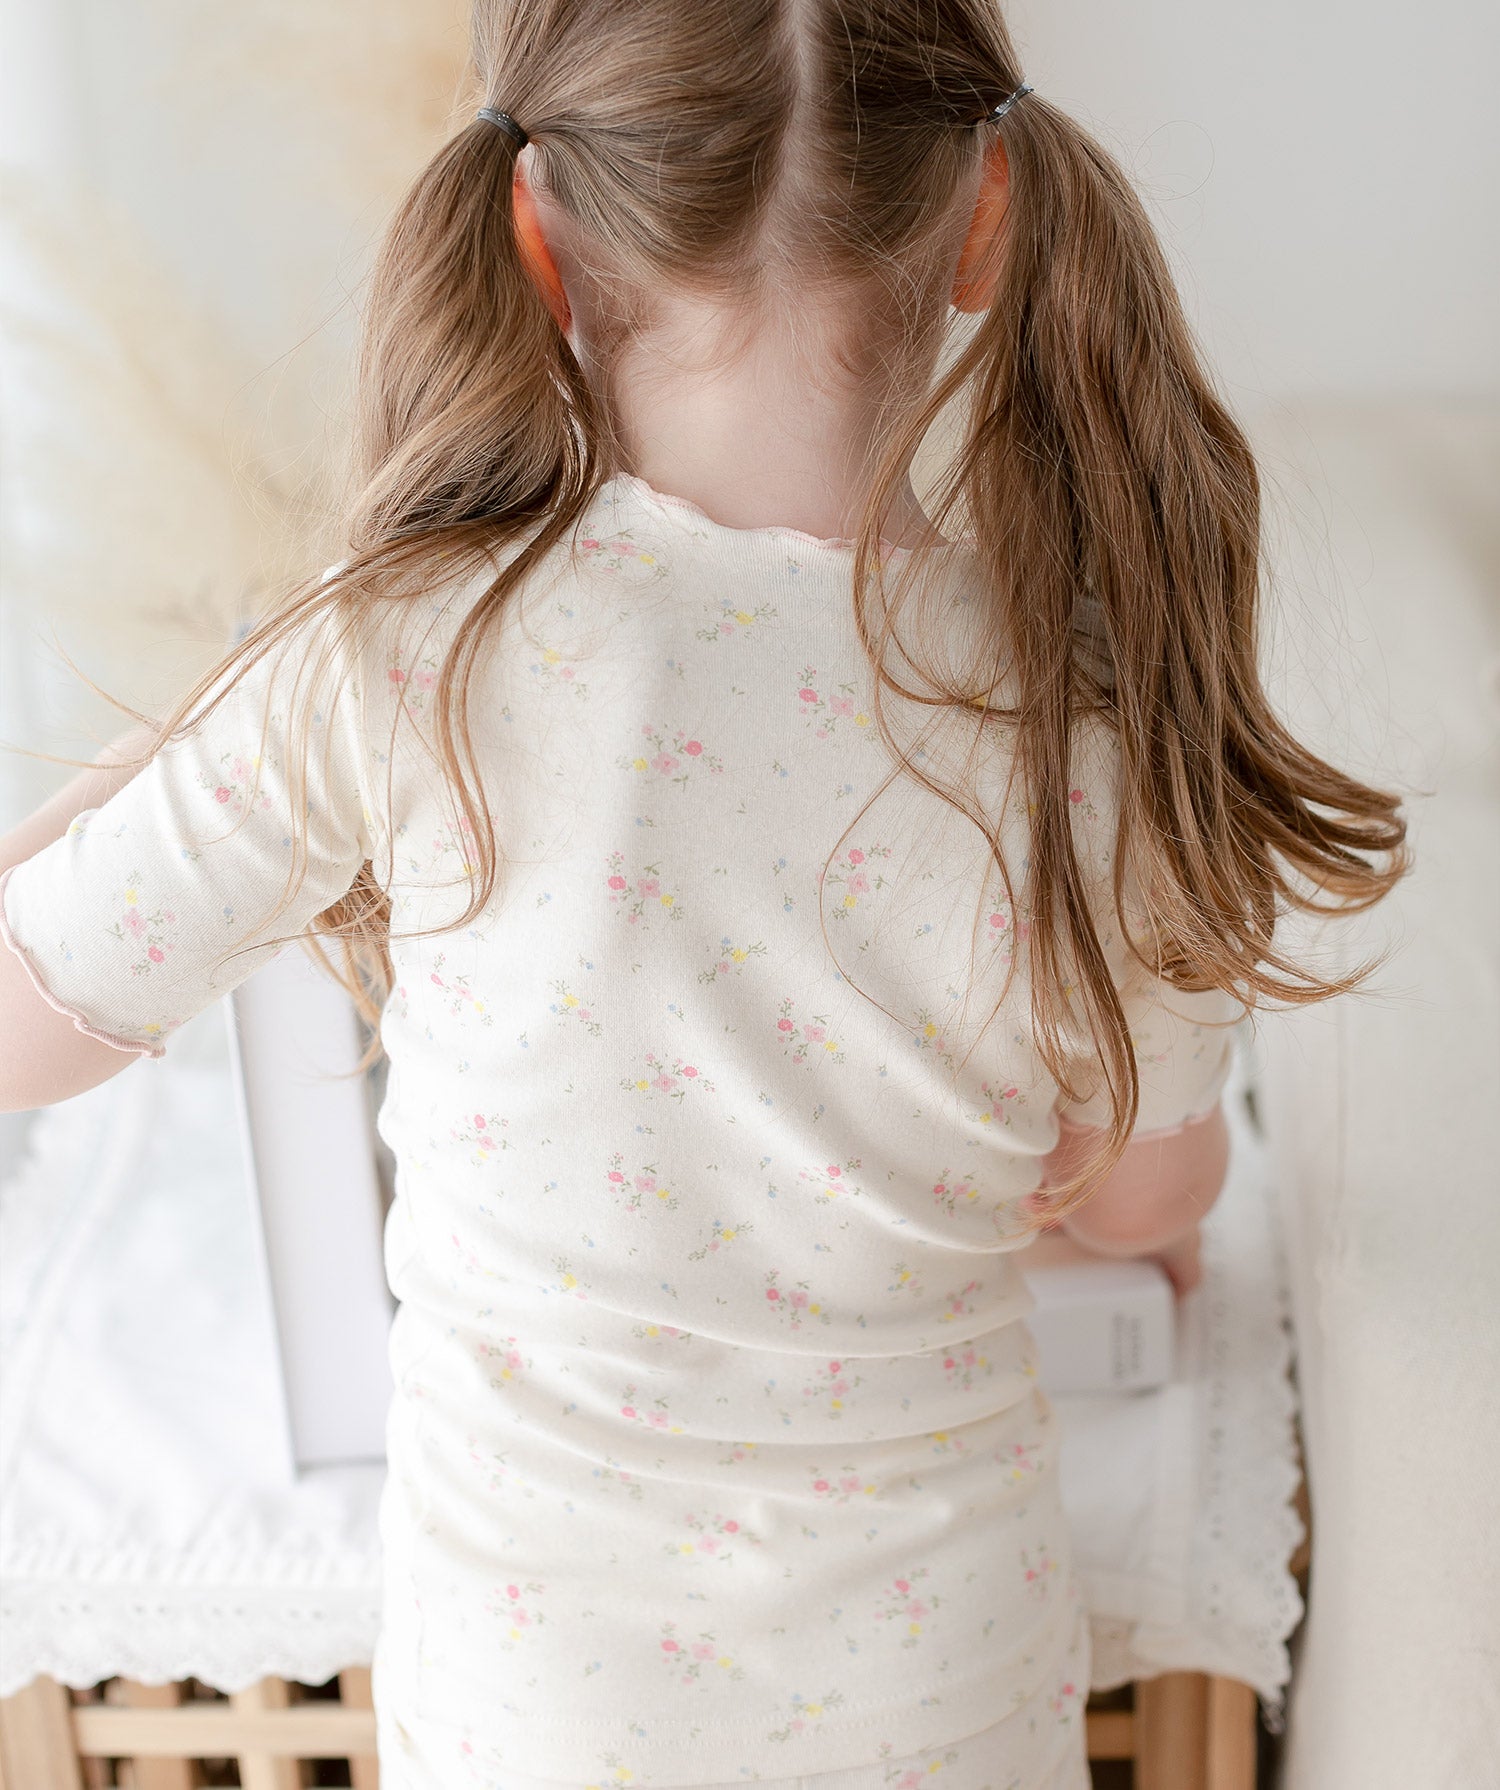 AVAUMA Bling Short Sleeve Set Ivory Ruffle Shirring These summer pajamas feature a serene floral pattern, perfect for warm nights. The fashionable 'Ruffle Shirring' design adds a touch of style while providing a soft, stretchy, and comfortable fit.